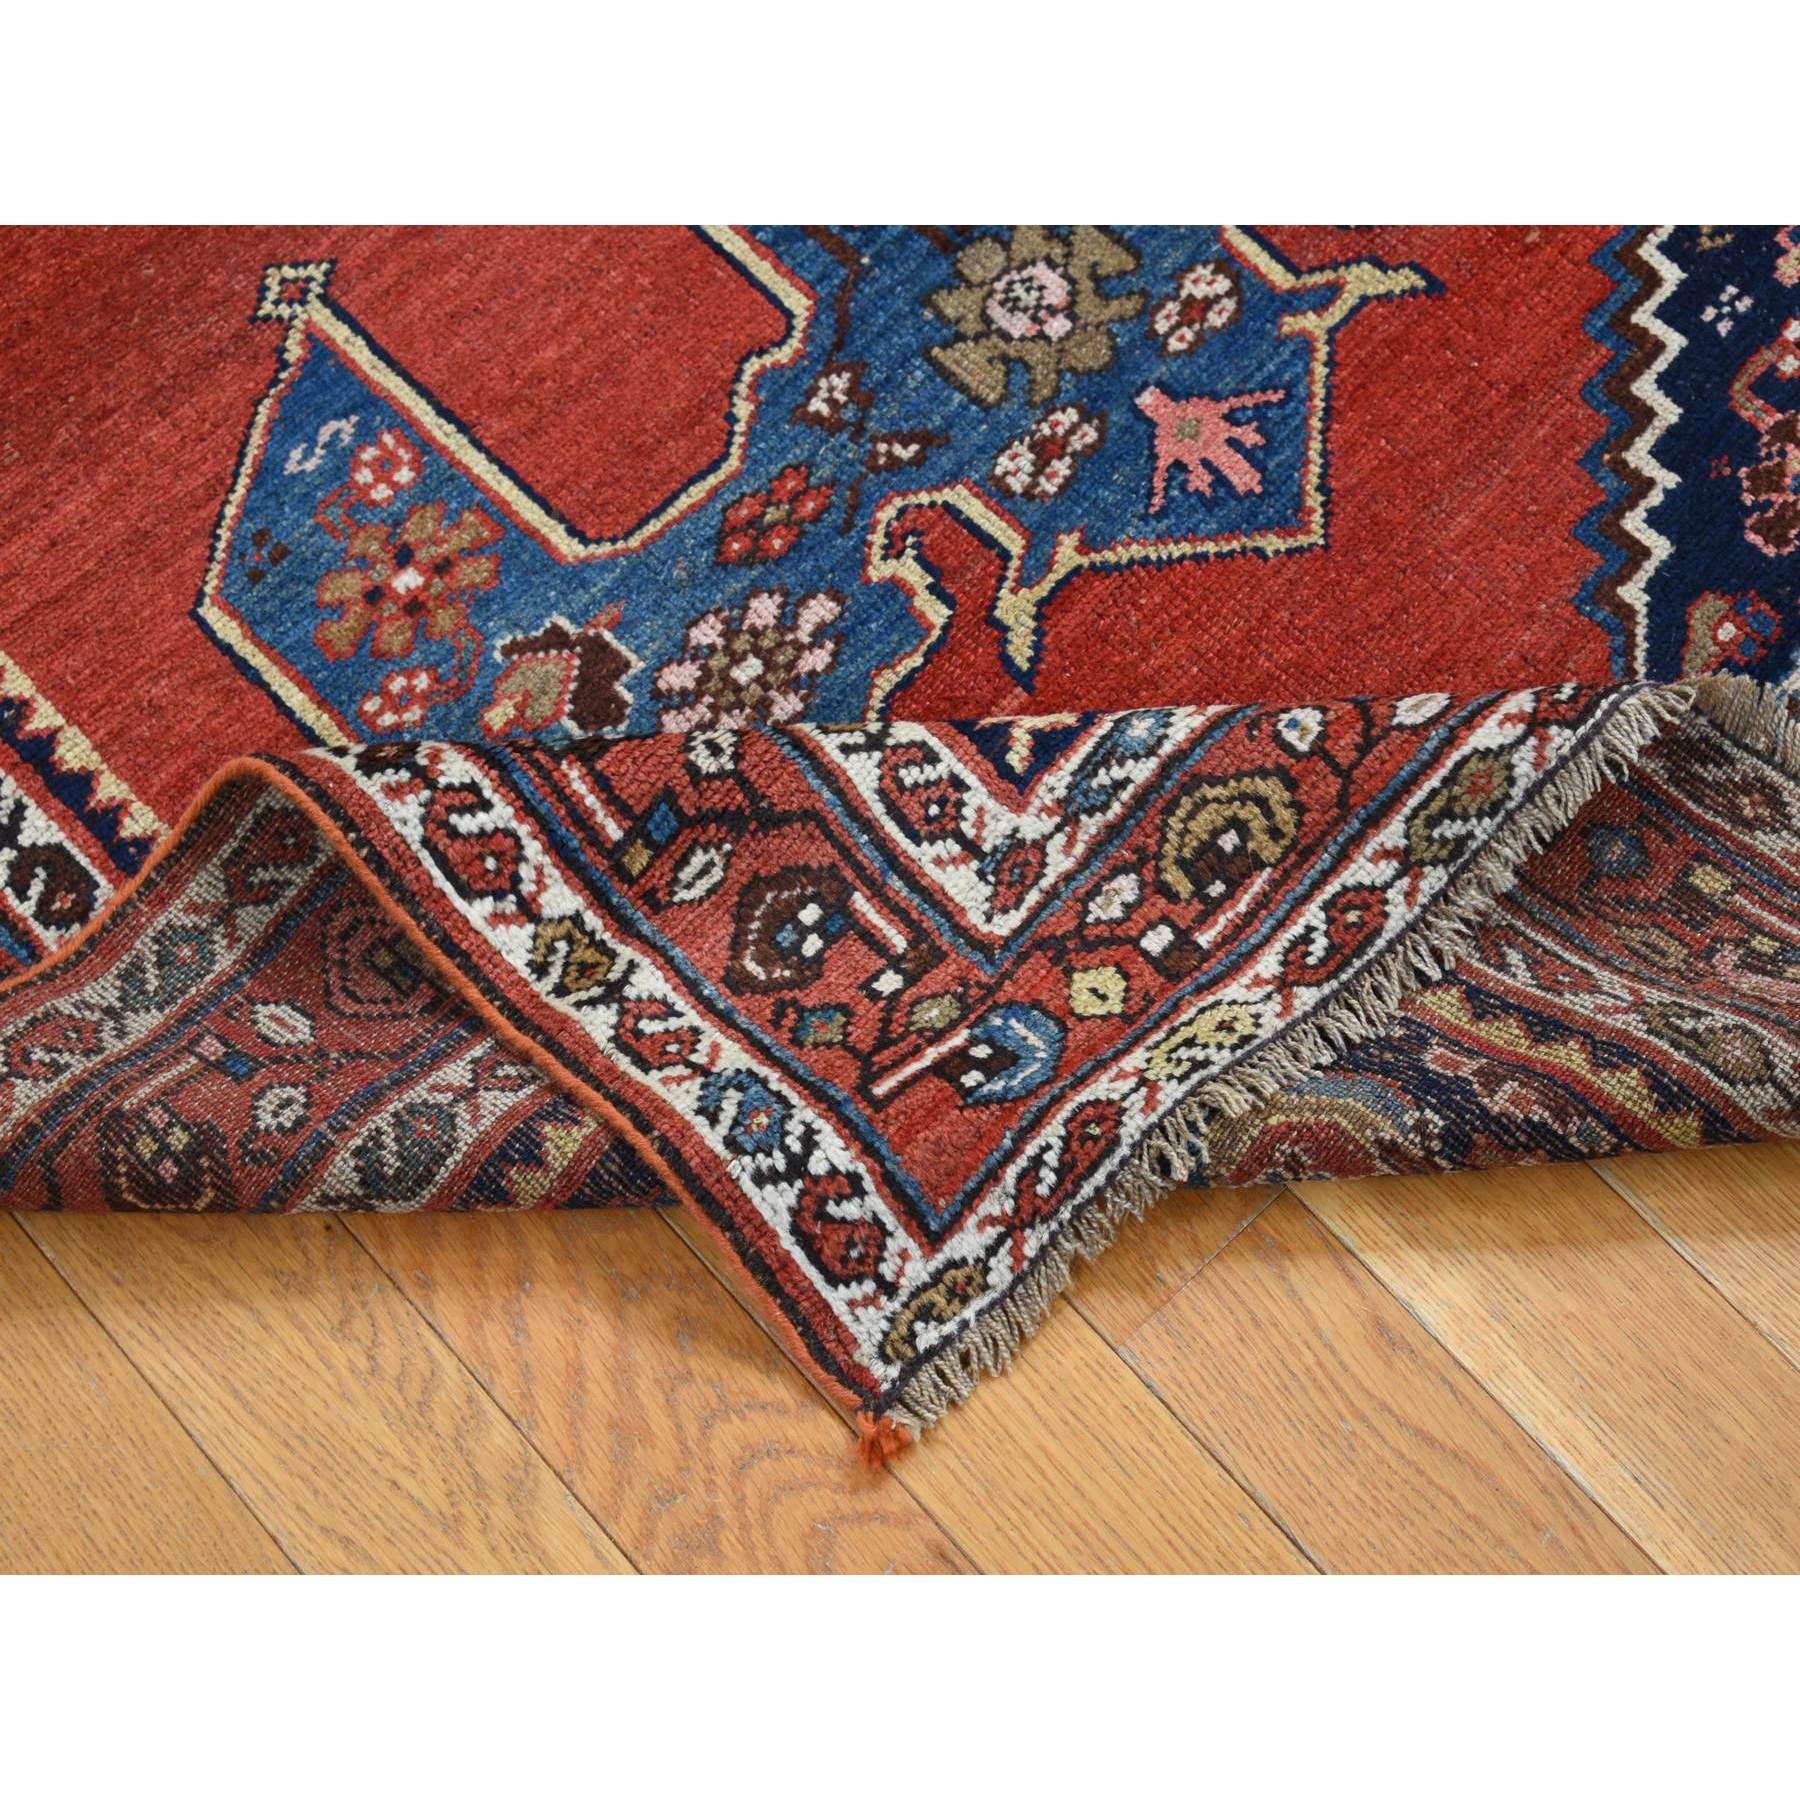 Medieval Chili Red Antique Persian Bijar Medallion Design Good Cond Hand Knotted Wool Rug